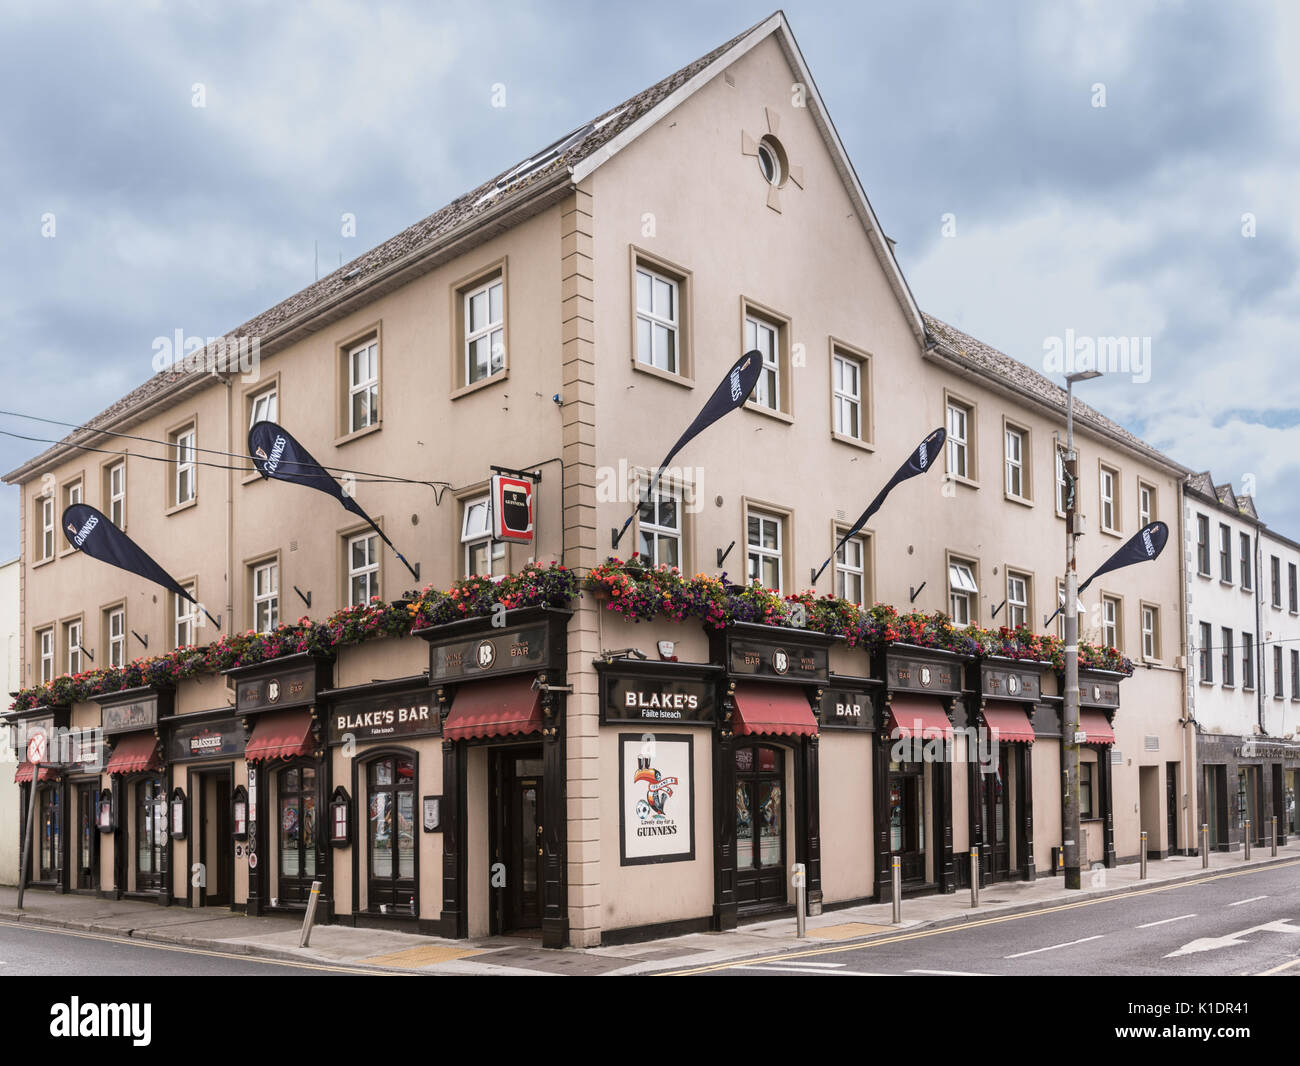 Galway, Ireland - August 3, 2017: Historic Blakes Bar and guesthouse two facades on corner with street view. Flowers, flags, awnings and signs. Stock Photo